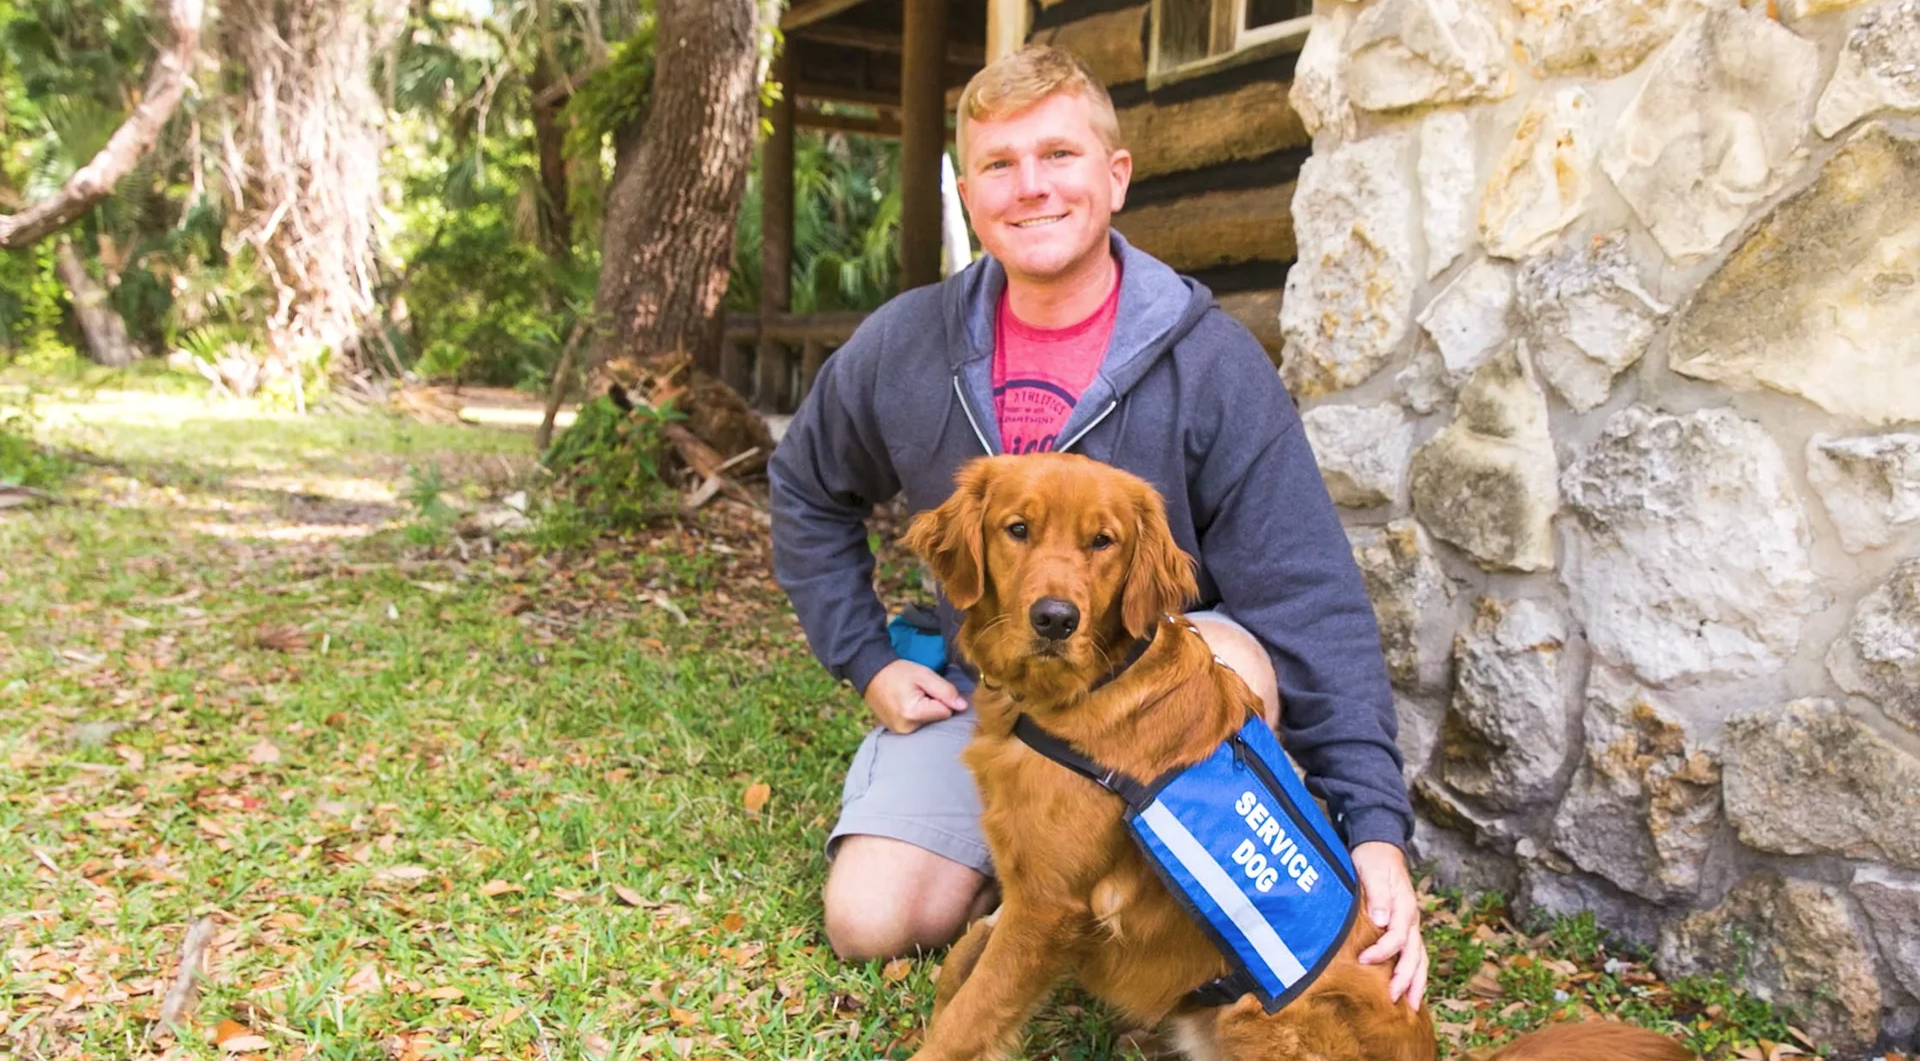 Man kneels and smiles while posed with golden retriever service dog